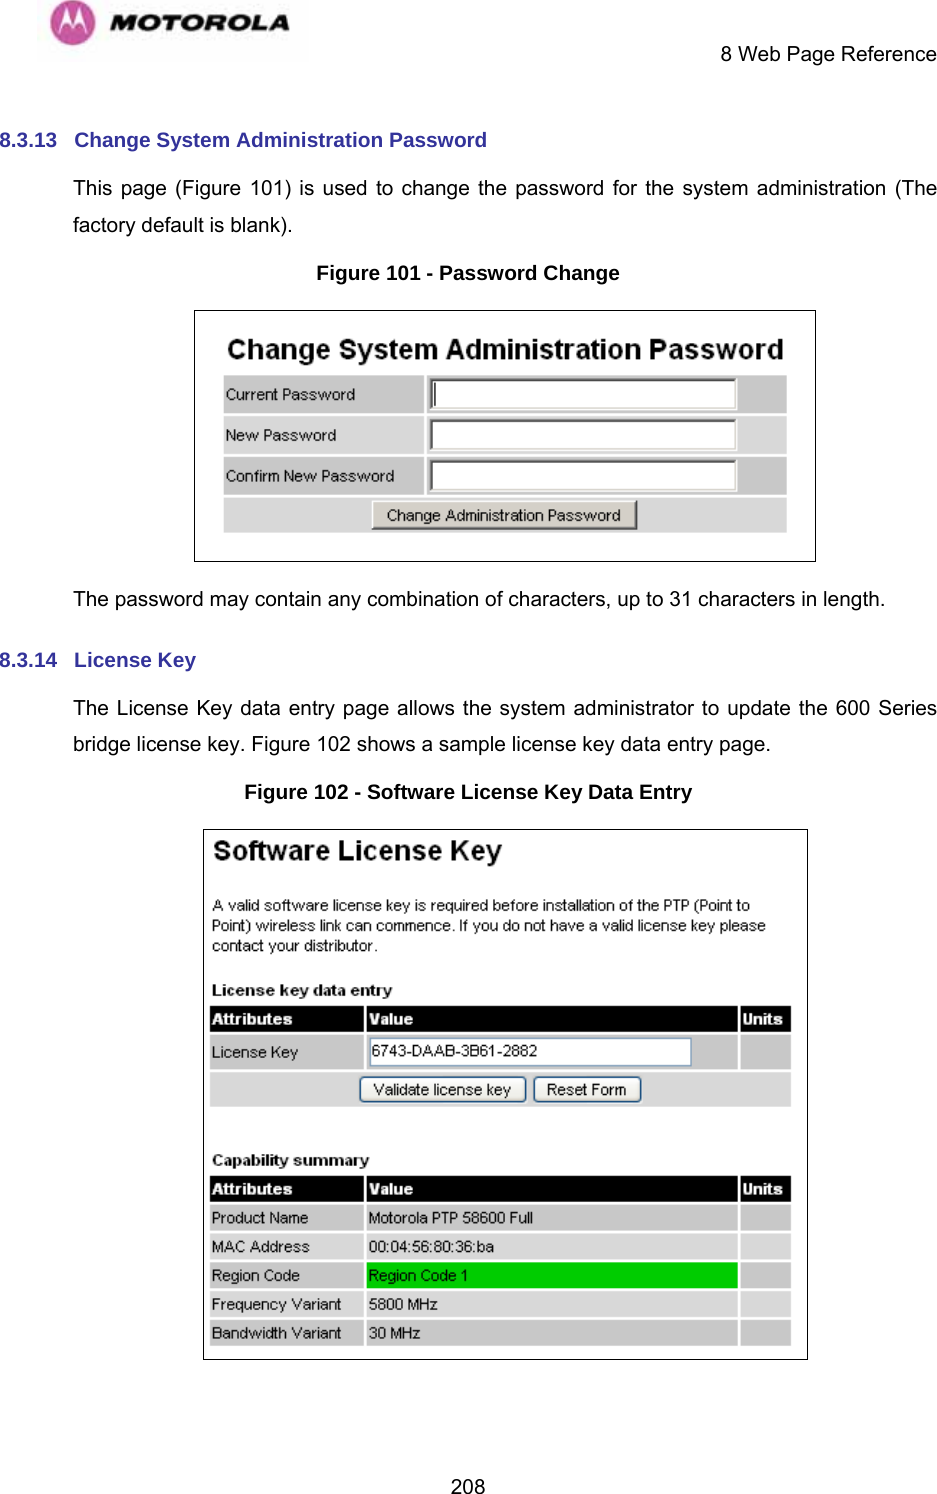     8 Web Page Reference  2088.3.13  Change System Administration Password  This page (Figure 101) is used to change the password for the system administration (The factory default is blank). Figure 101 - Password Change  The password may contain any combination of characters, up to 31 characters in length. 8.3.14  License Key The License Key data entry page allows the system administrator to update the 600 Series bridge license key. Figure 102 shows a sample license key data entry page. Figure 102 - Software License Key Data Entry   